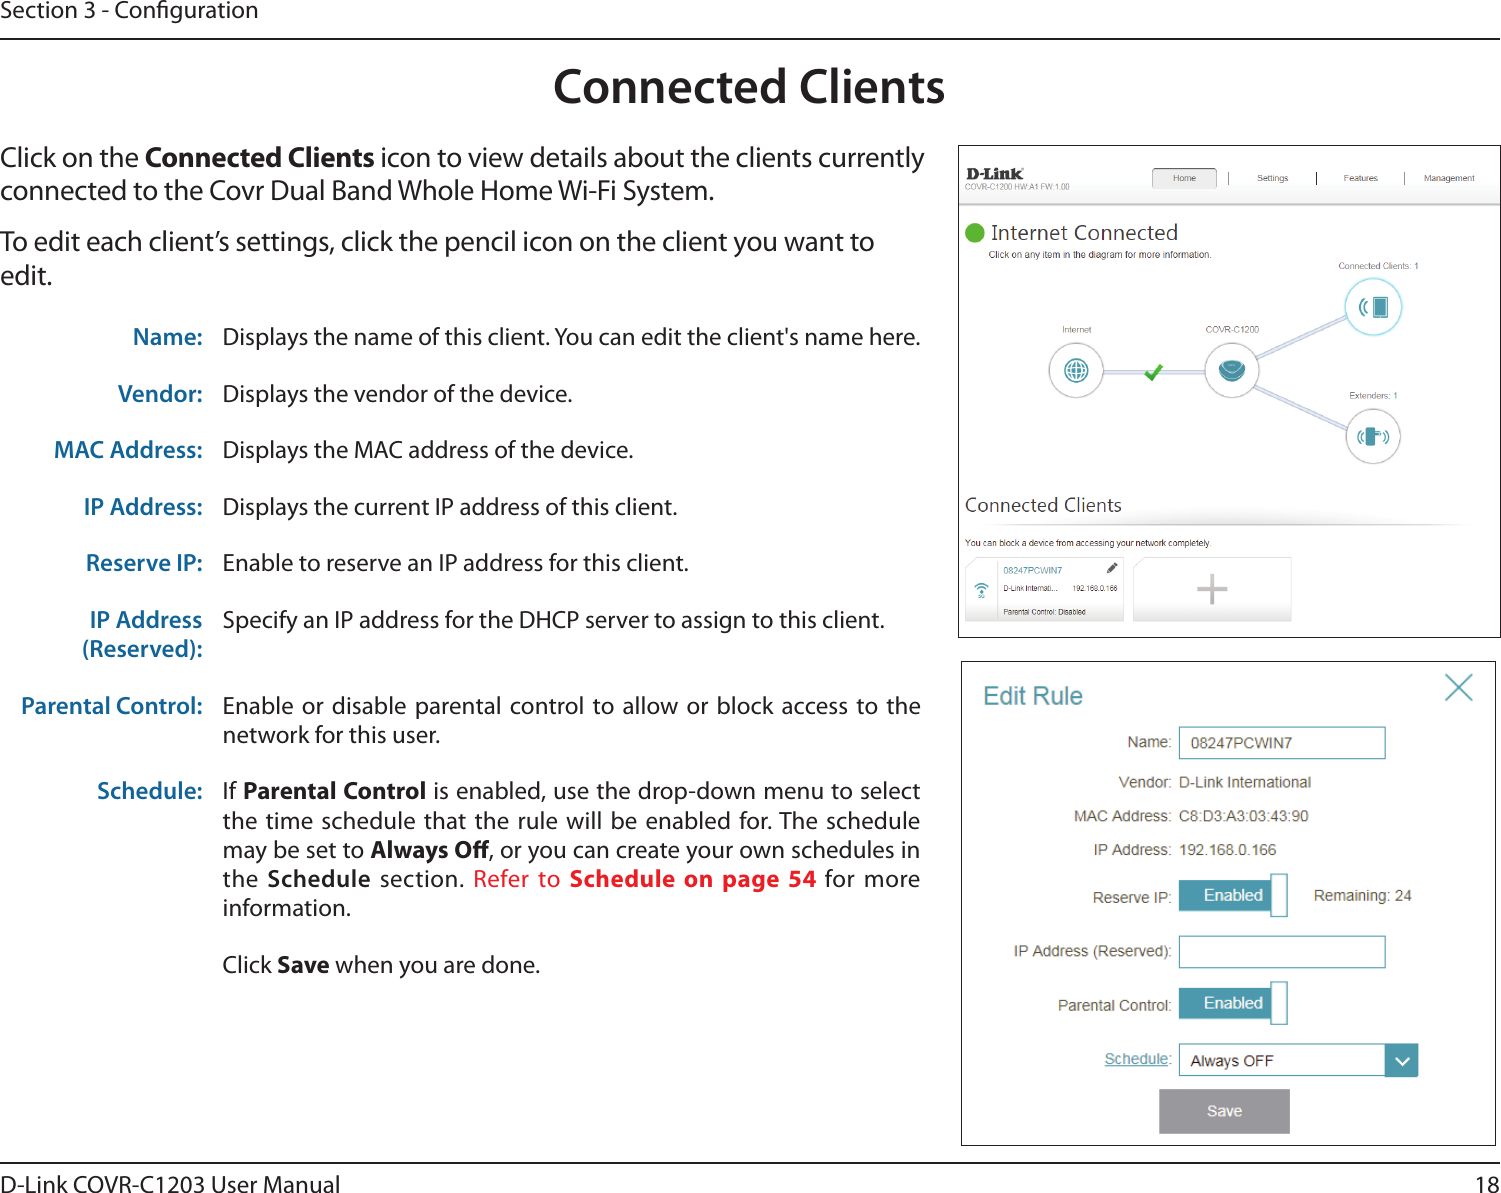 18D-Link COVR-C1203 User ManualSection 3 - CongurationConnected ClientsClick on the Connected Clients icon to view details about the clients currently connected to the Covr Dual Band Whole Home Wi-Fi System.To edit each client’s settings, click the pencil icon on the client you want to edit.Name: Displays the name of this client. You can edit the client&apos;s name here.Vendor: Displays the vendor of the device.MAC Address: Displays the MAC address of the device.IP Address: Displays the current IP address of this client.Reserve IP: Enable to reserve an IP address for this client.IP Address (Reserved):Specify an IP address for the DHCP server to assign to this client.Parental Control: Enable or disable parental control to allow or block access to the network for this user.Schedule: If Parental Control is enabled, use the drop-down menu to select the time schedule that the rule will be enabled for. The schedule may be set to Always O, or you can create your own schedules in the Schedule section. Refer to Schedule on page 54 for more information.Click Save when you are done.